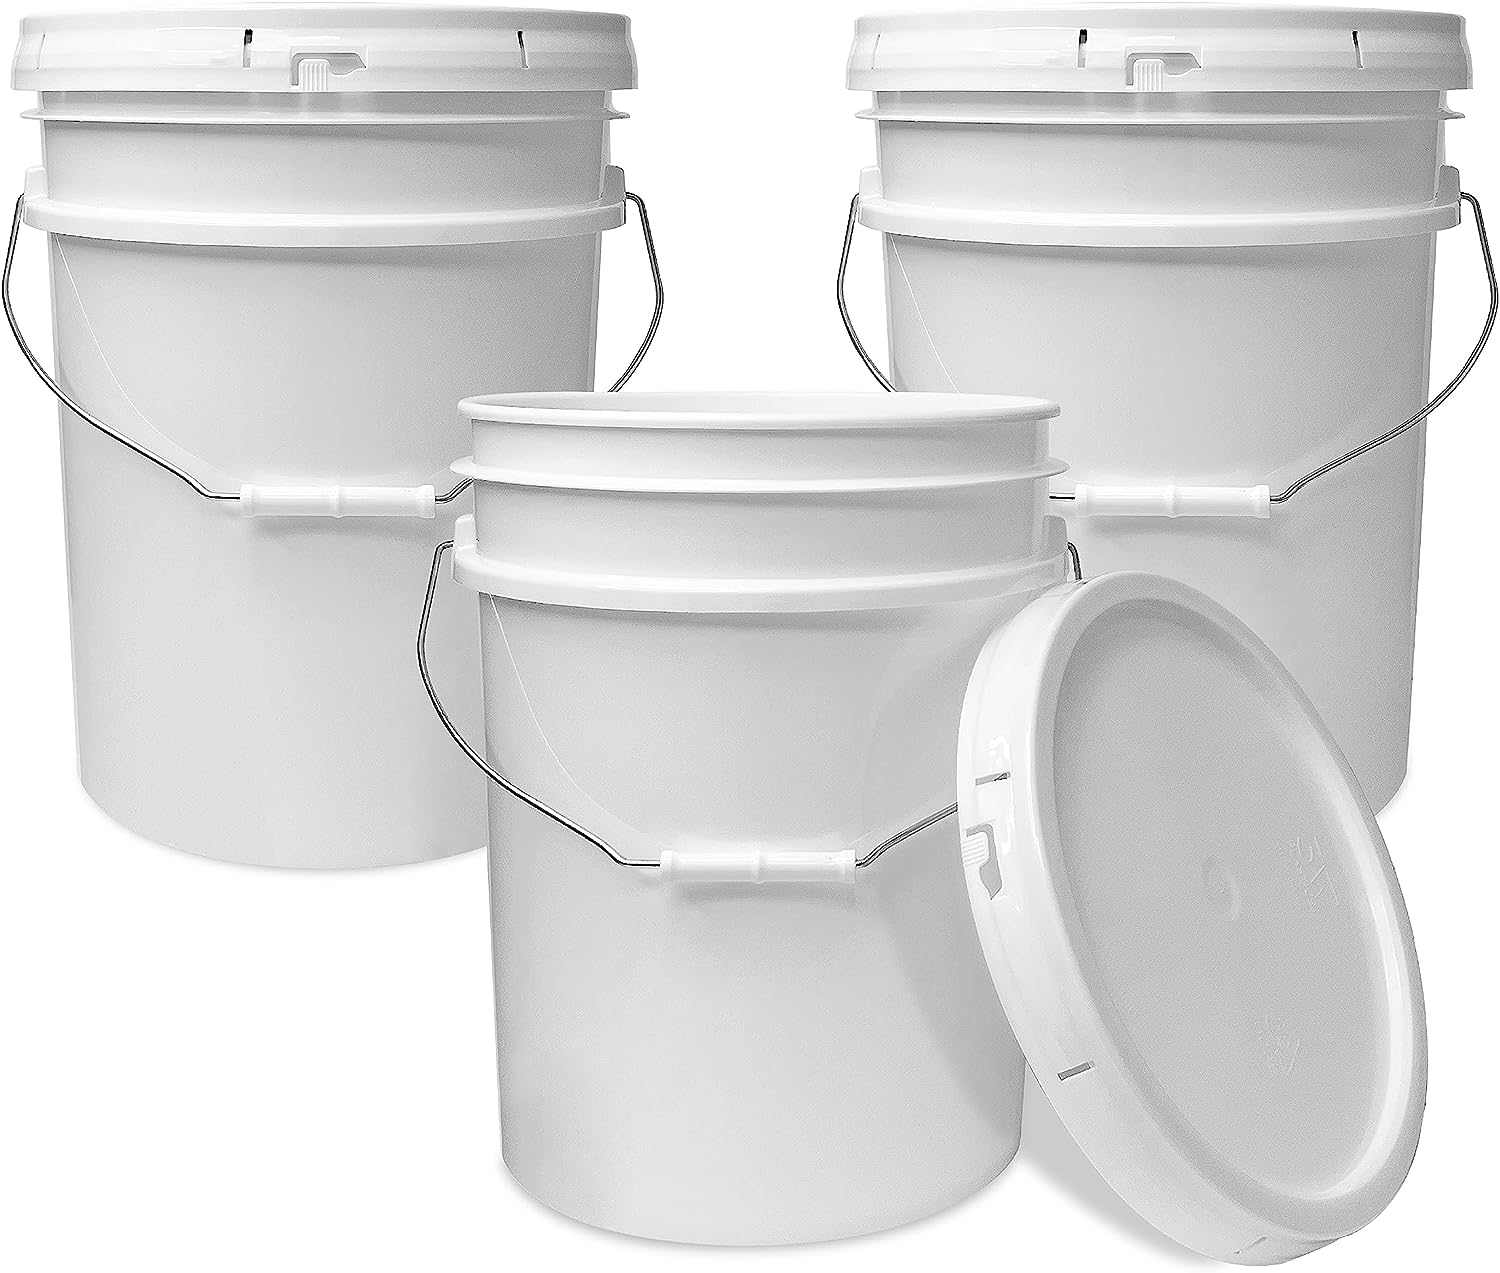 5 Gallon Plastic Containers used for Kratky Container Gardening